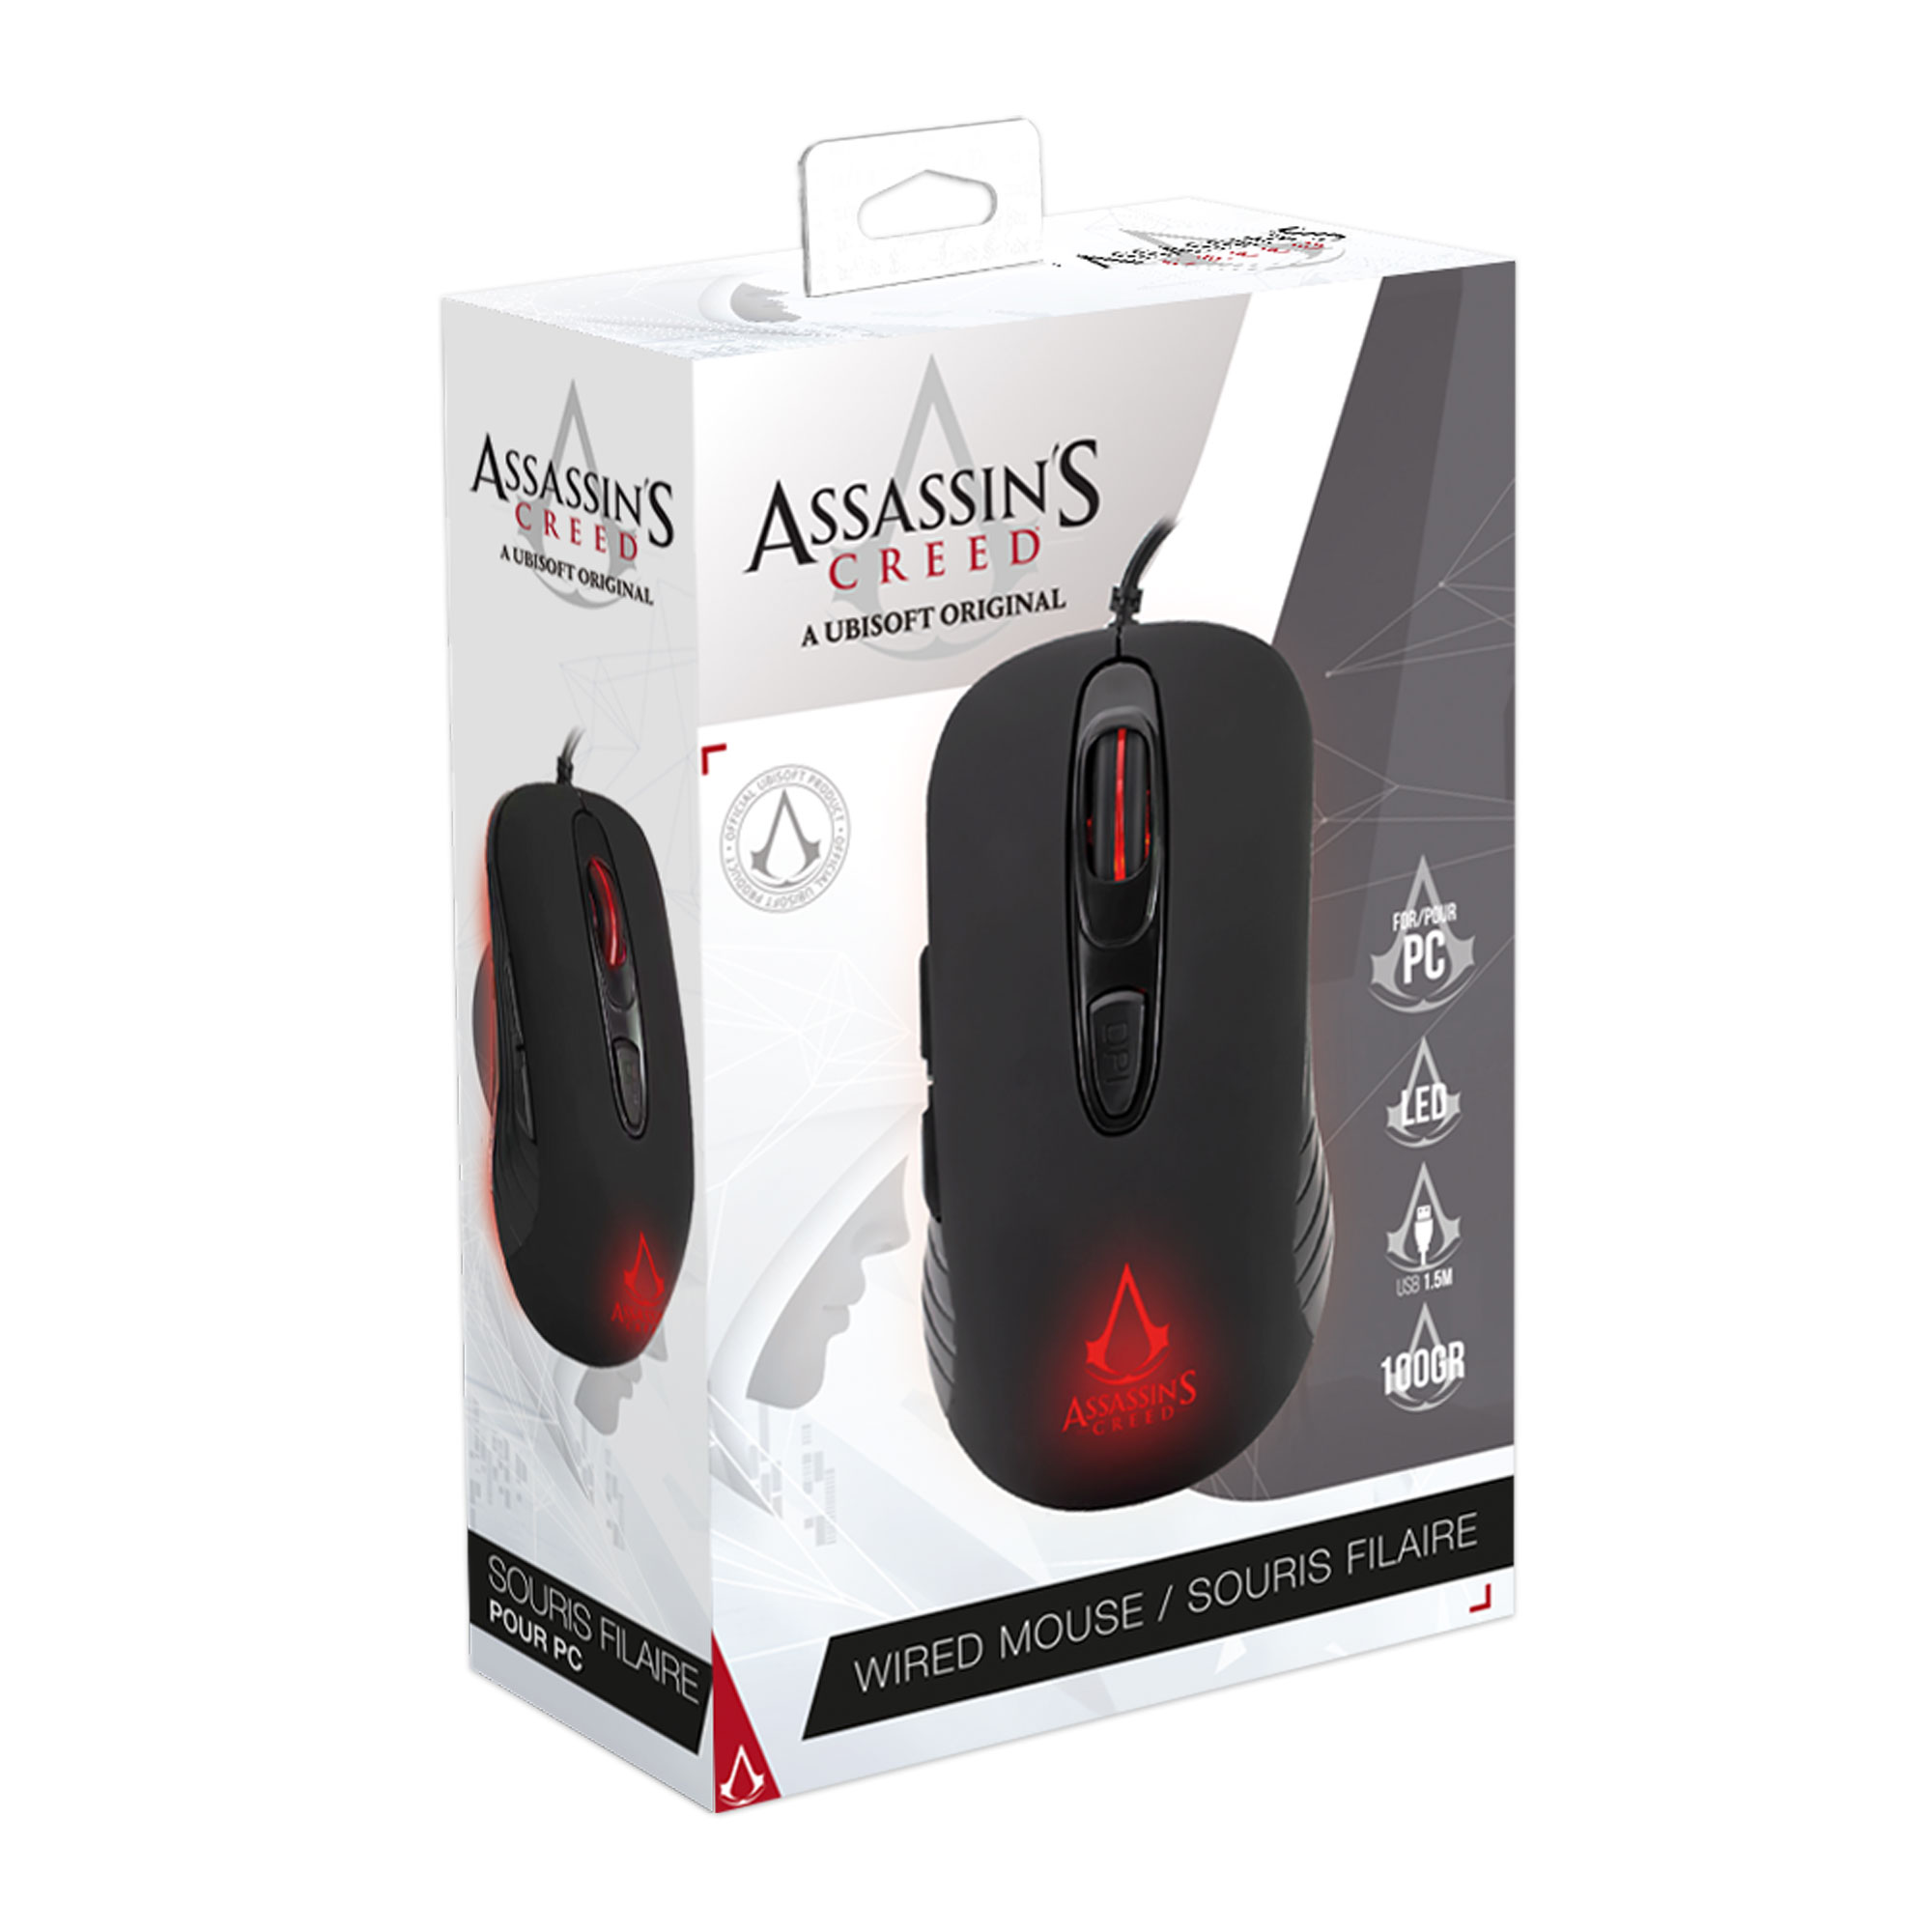 Assassin's Creed - Souris Gaming 3600 DPI - LED - Noir - Freaks and Geeks